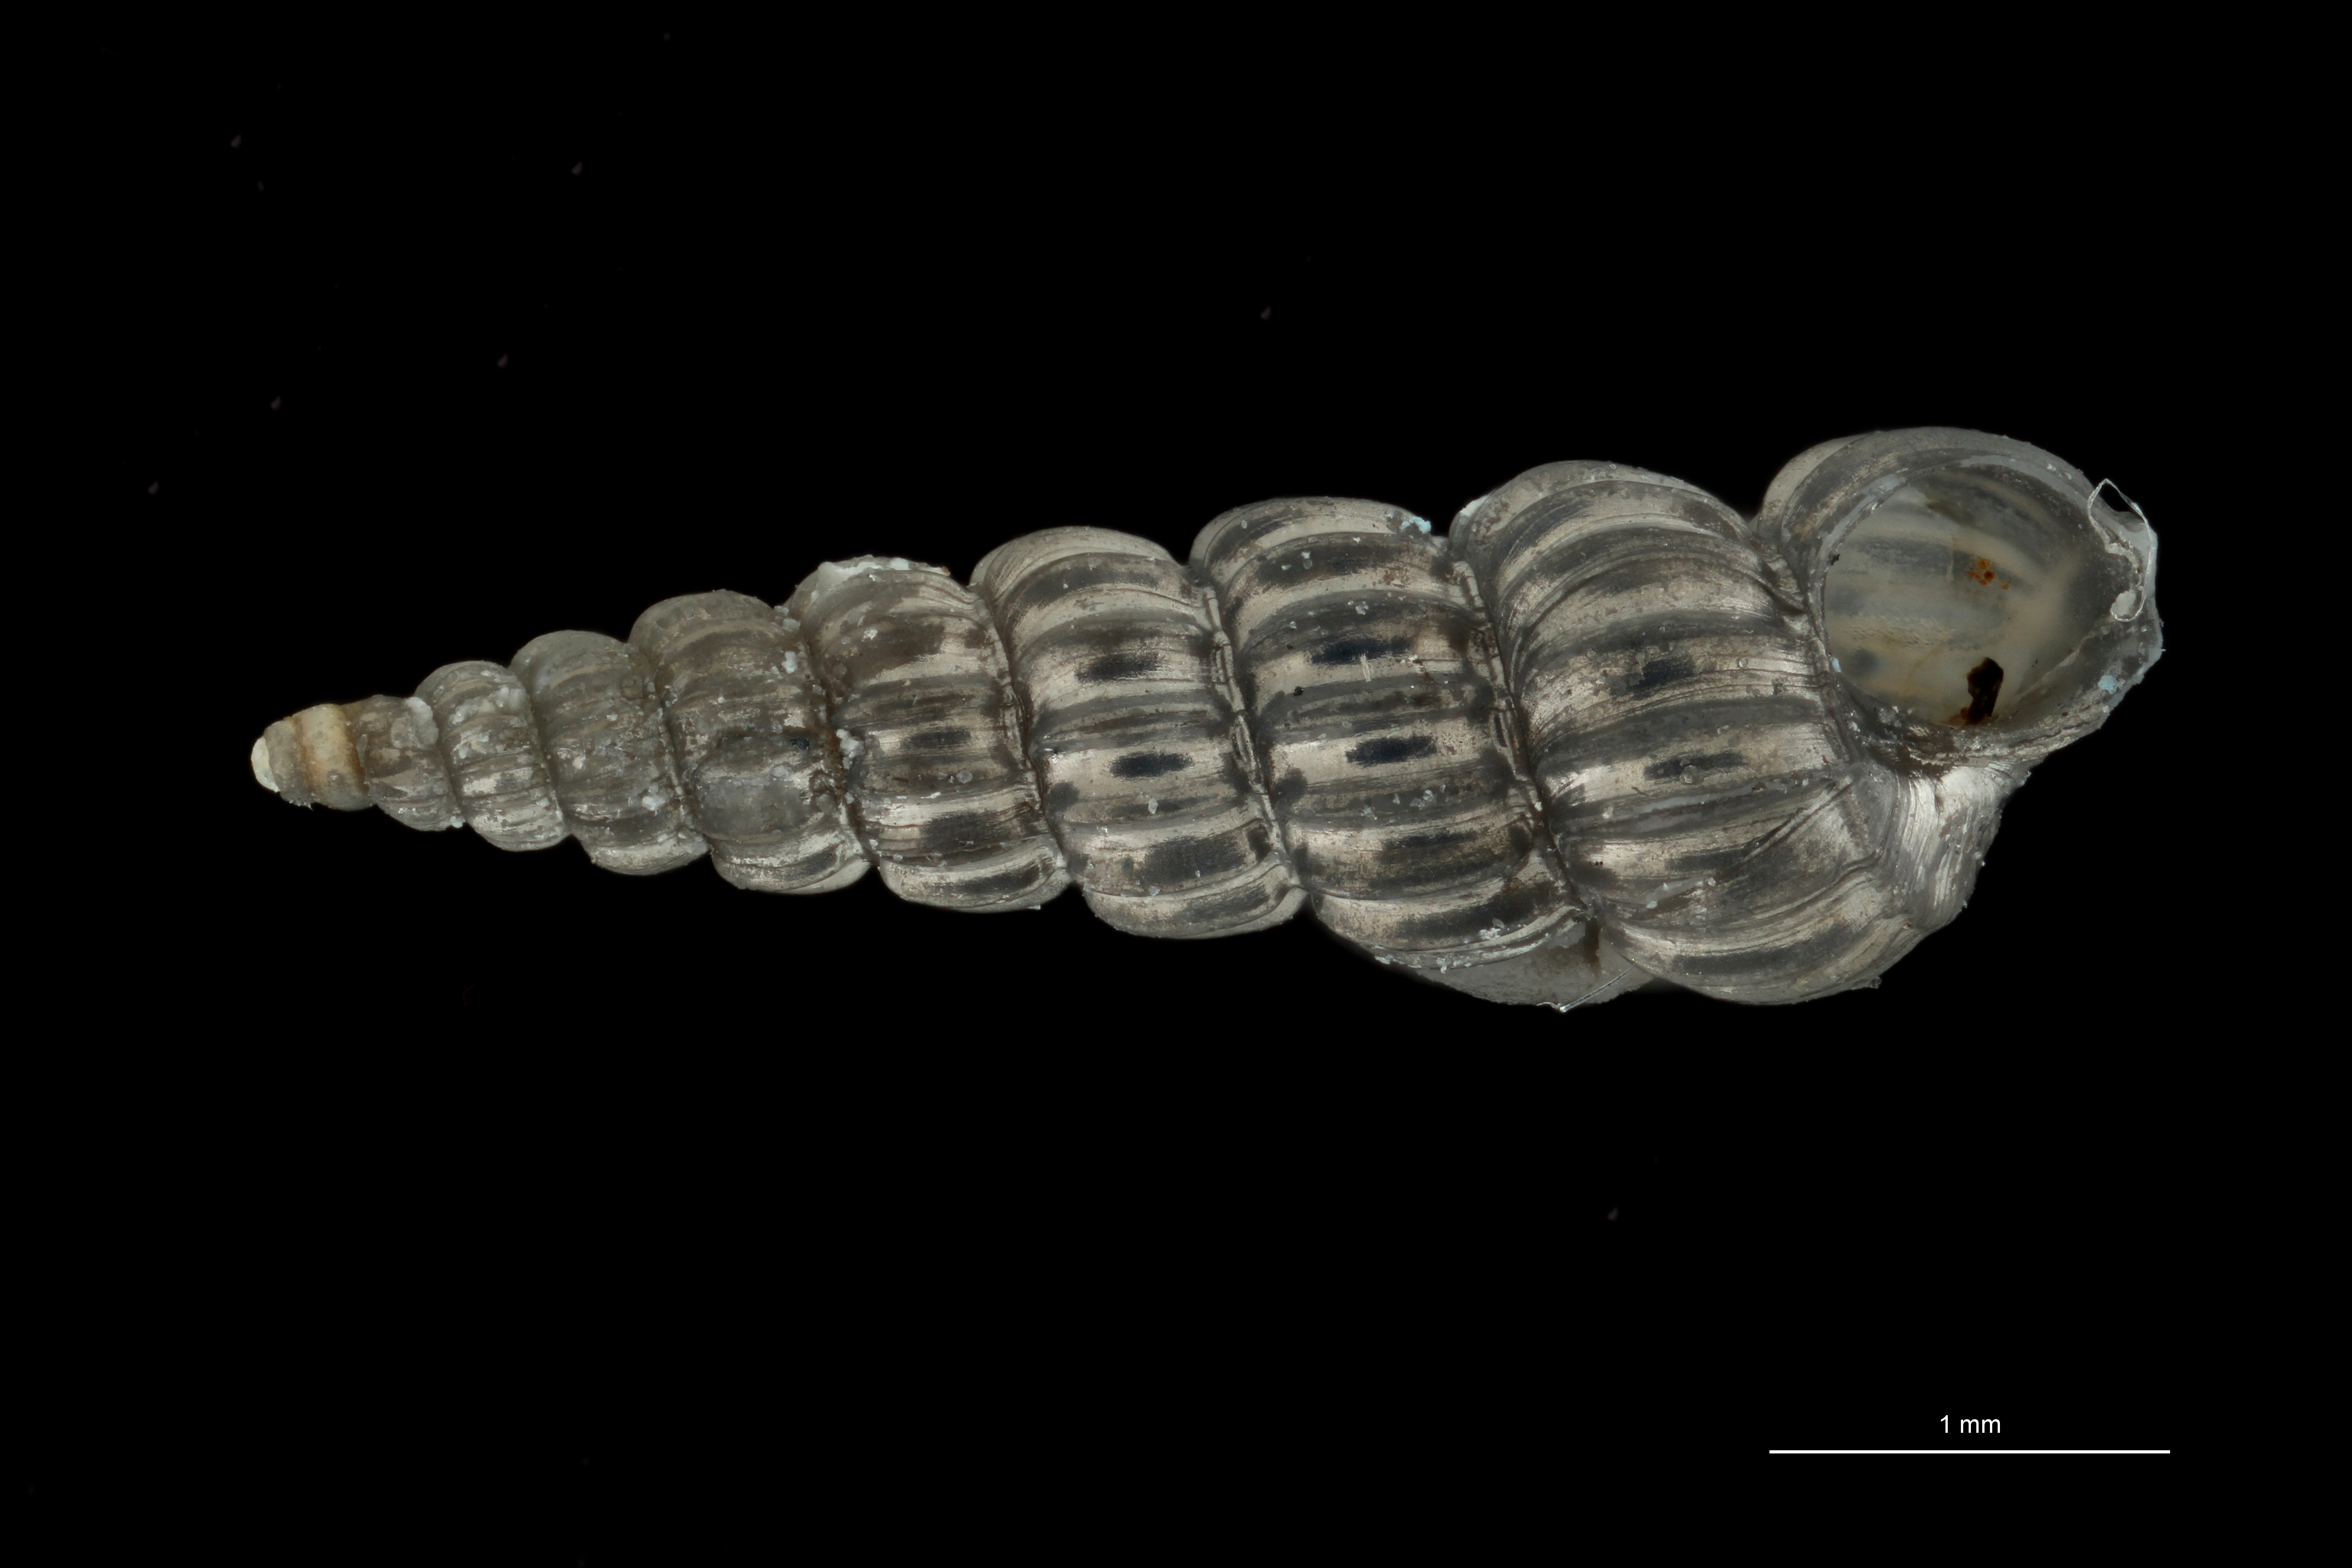 BE-RBINS-INV HOLOTYPE MT 410 Scala fulgens VENTRAL ZS PMax Scaled.jpg